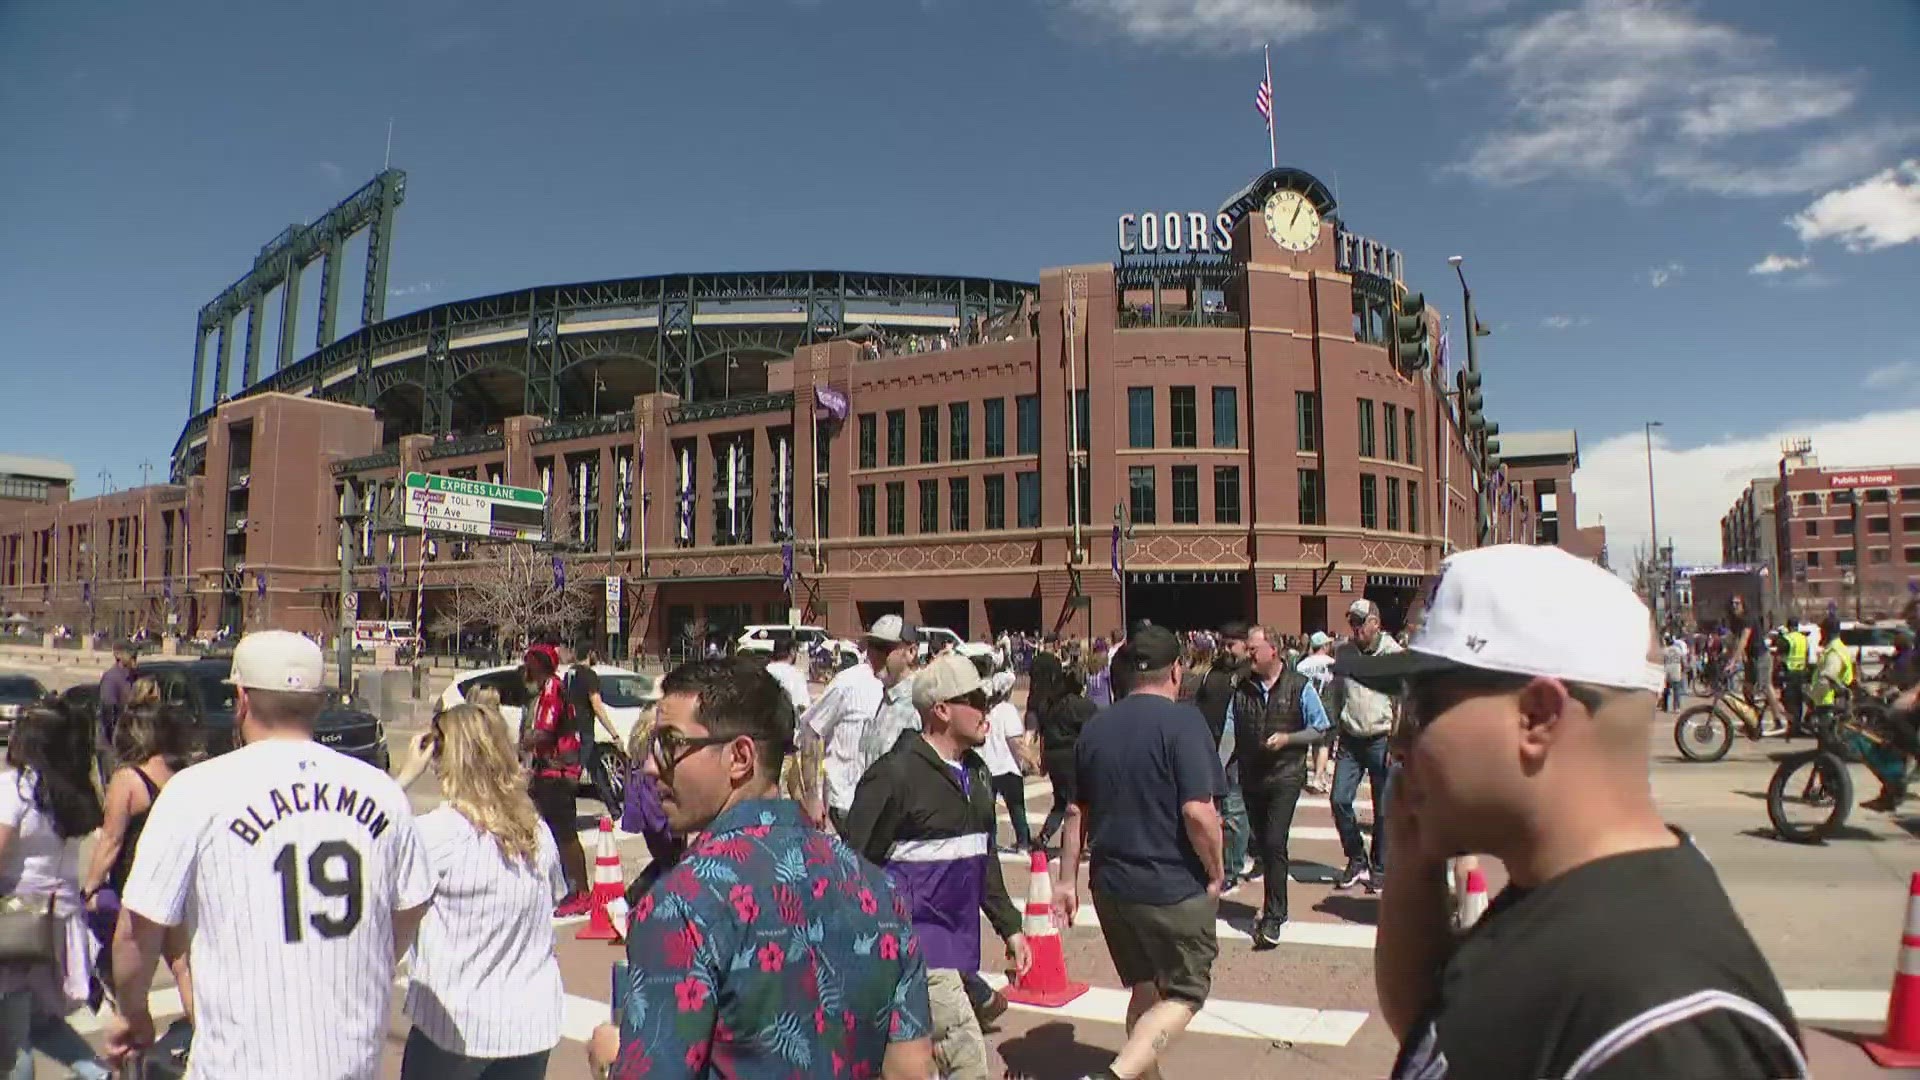 The Rockies may not be the best team in the MLB this year, but fans still love going to Coors Field.